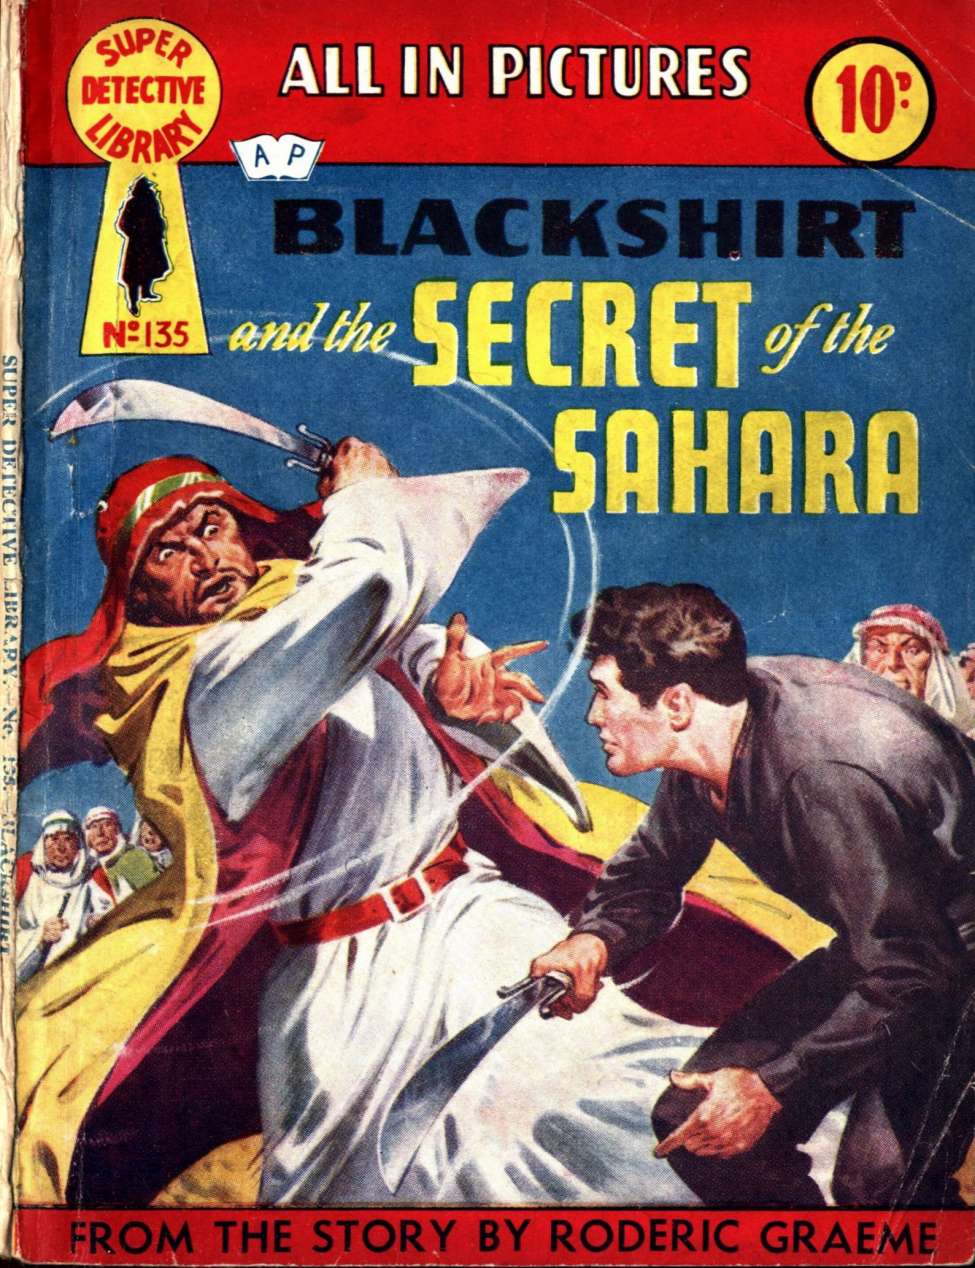 Book Cover For Super Detective Library 135 - Blackshirt and the Secret of the Sahara